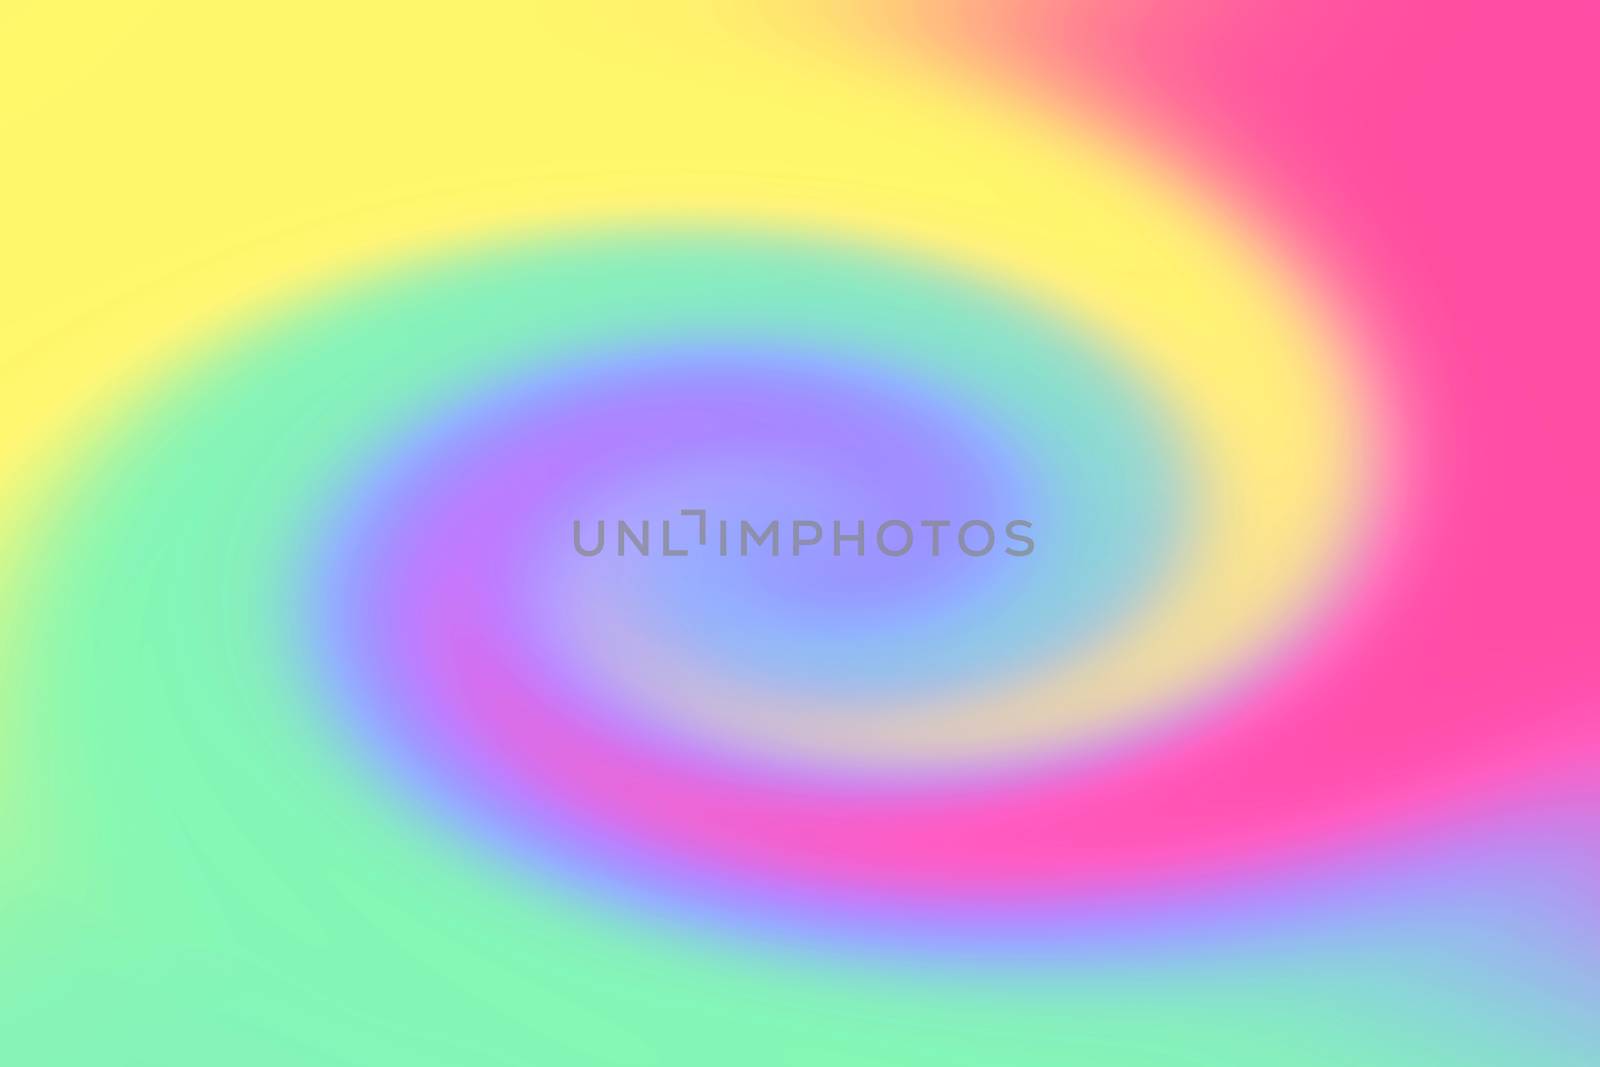 blurred twist colorful bright gradient, rainbow colorful light swirl wave effect background, colorful gradient soft wallpaper sweet swirl rainbow by cgdeaw